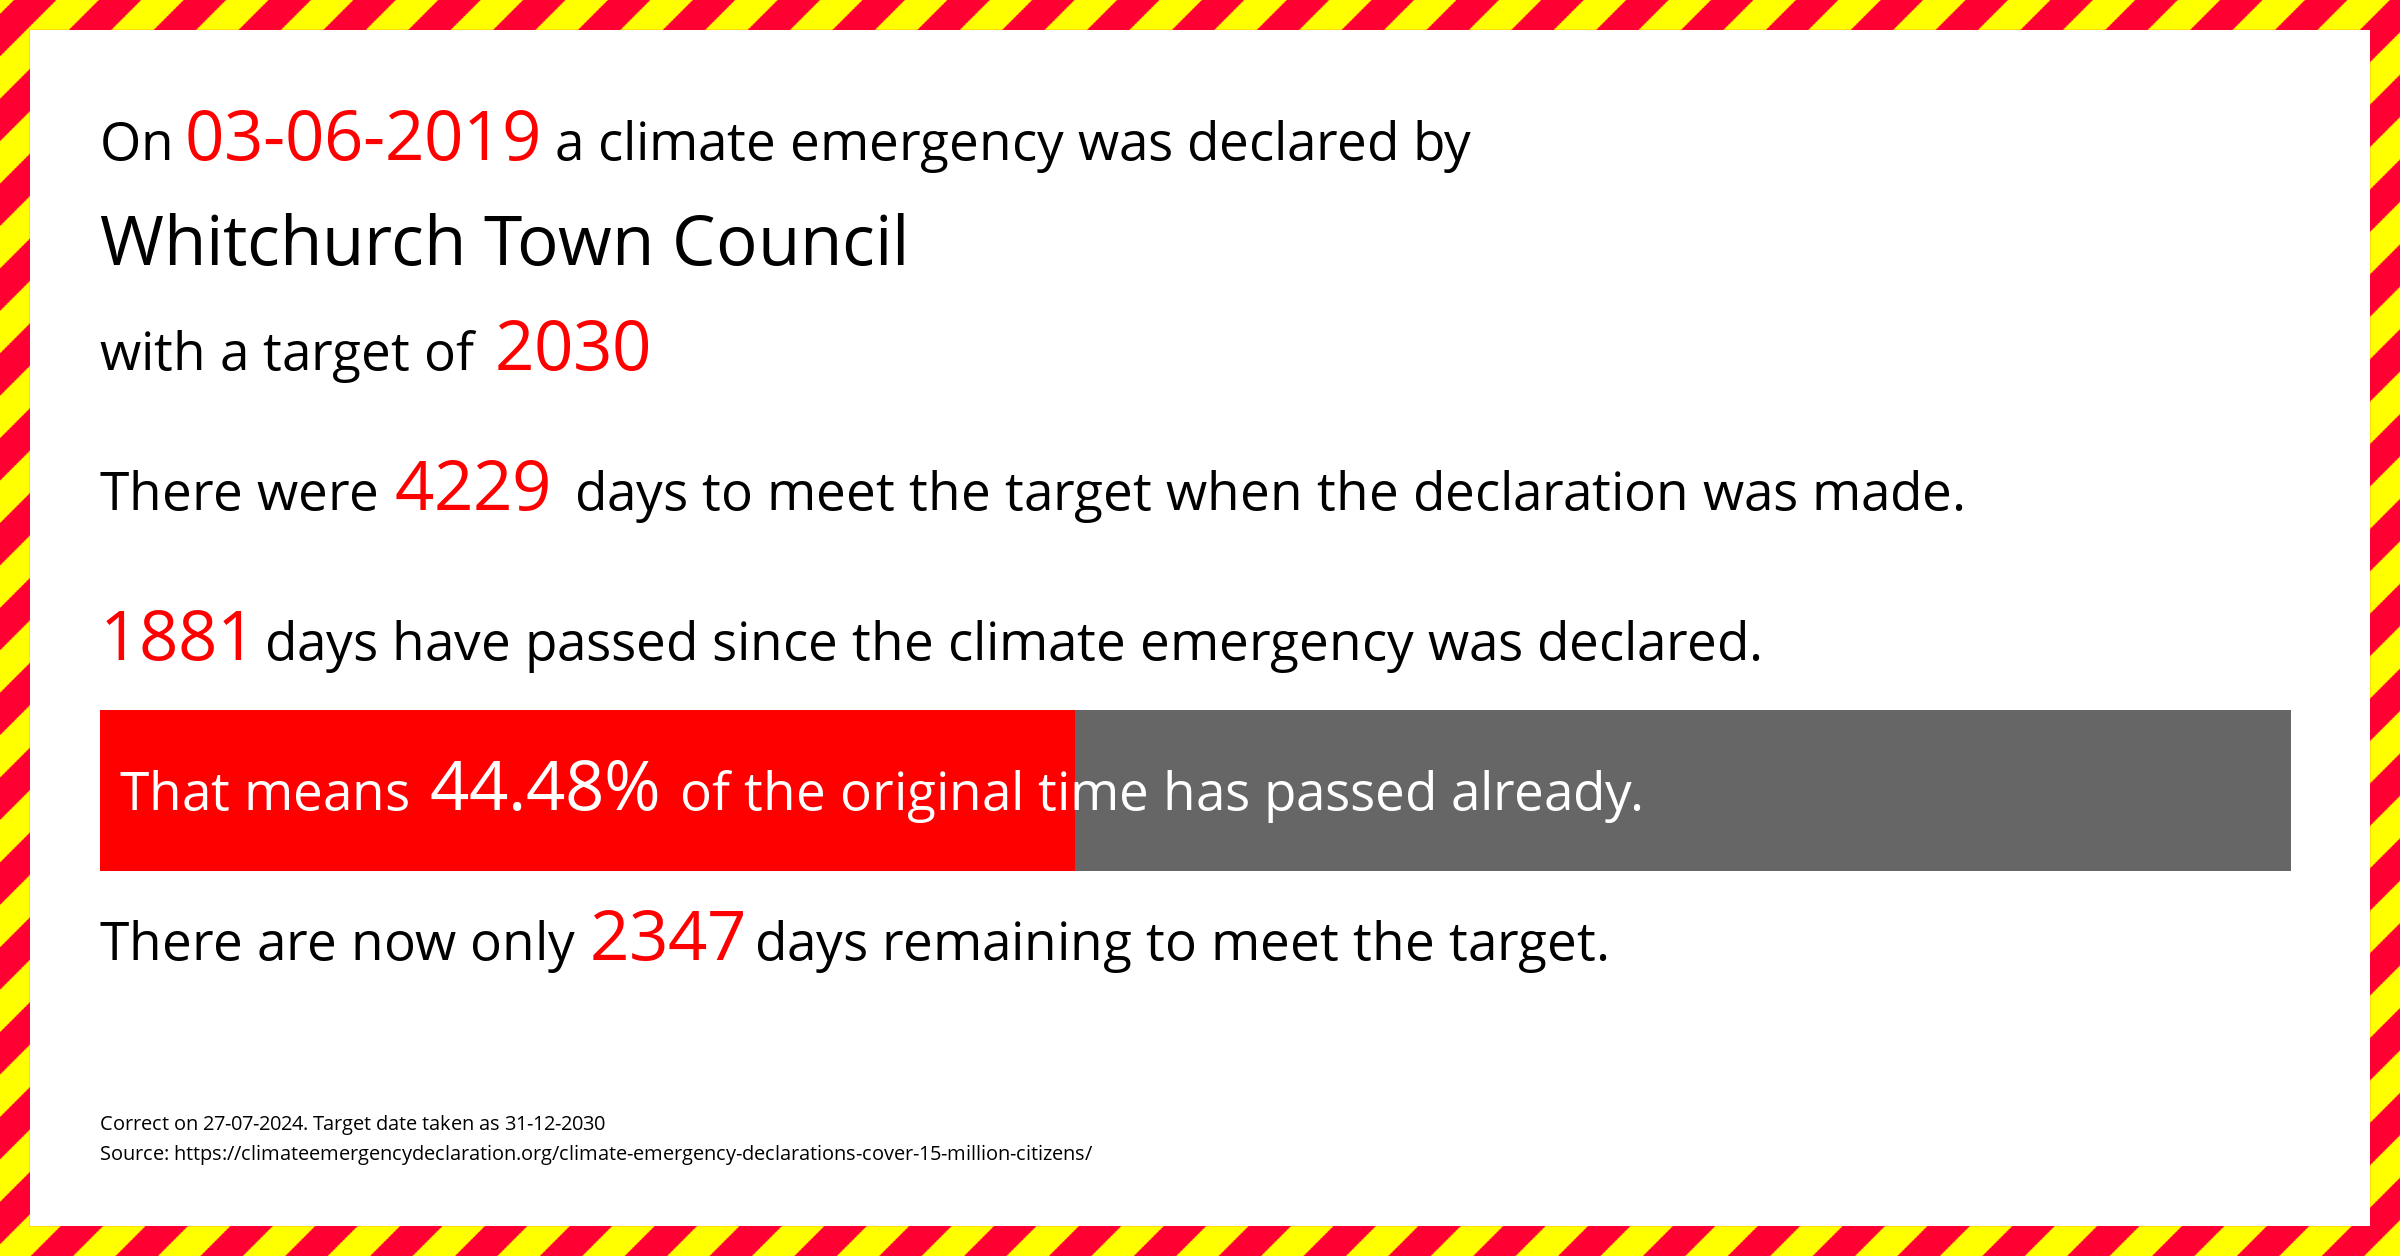 Whitchurch Town Council declared a Climate emergency on Monday 3rd June 2019, with a target of 2030.